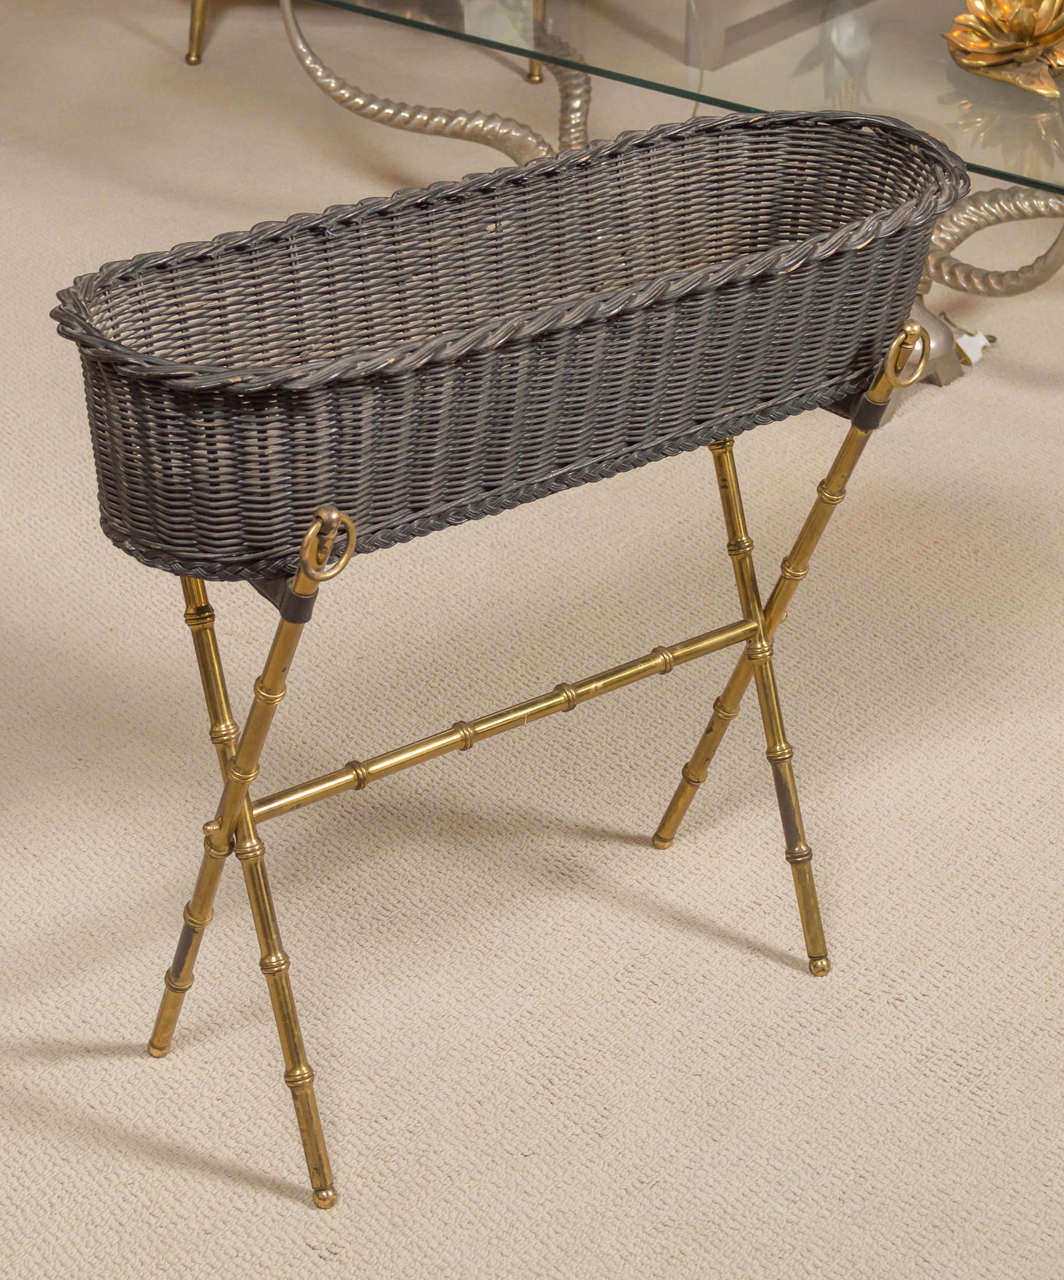 A wicker planter with bamboo motif, gilt brass base, by Jacques ADNET - France,circa 1960.